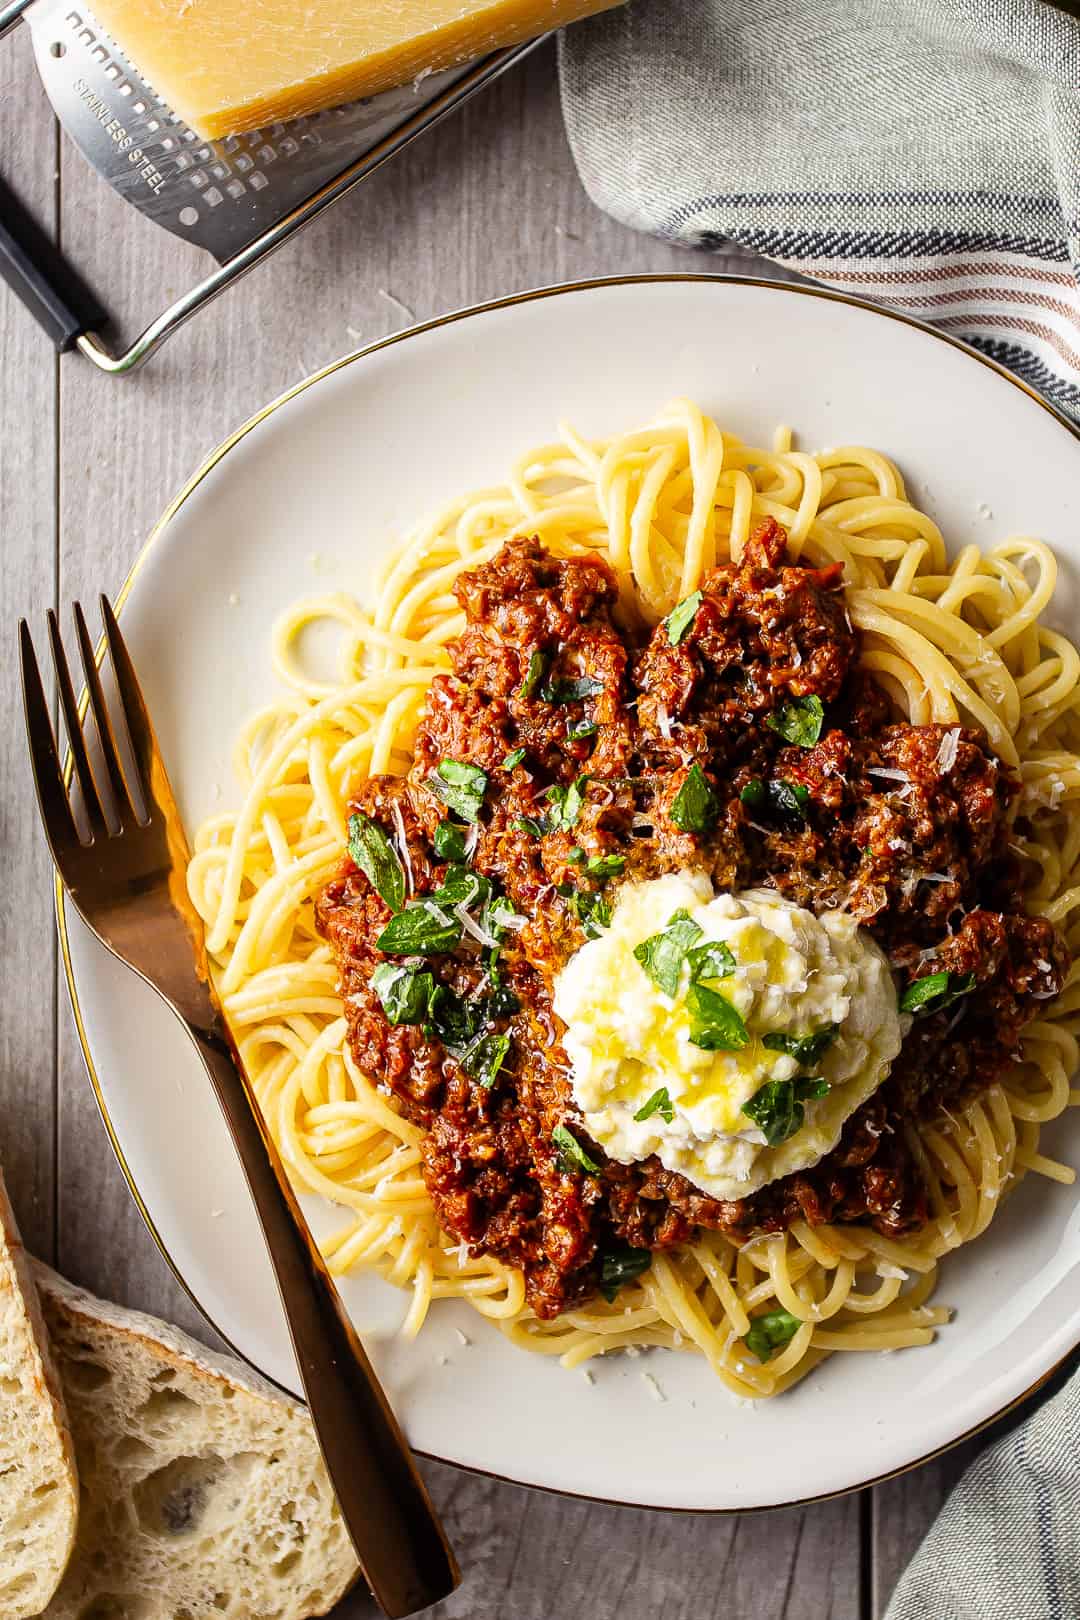 Bolognese sauce served over pasta with olive oil and parmesan.